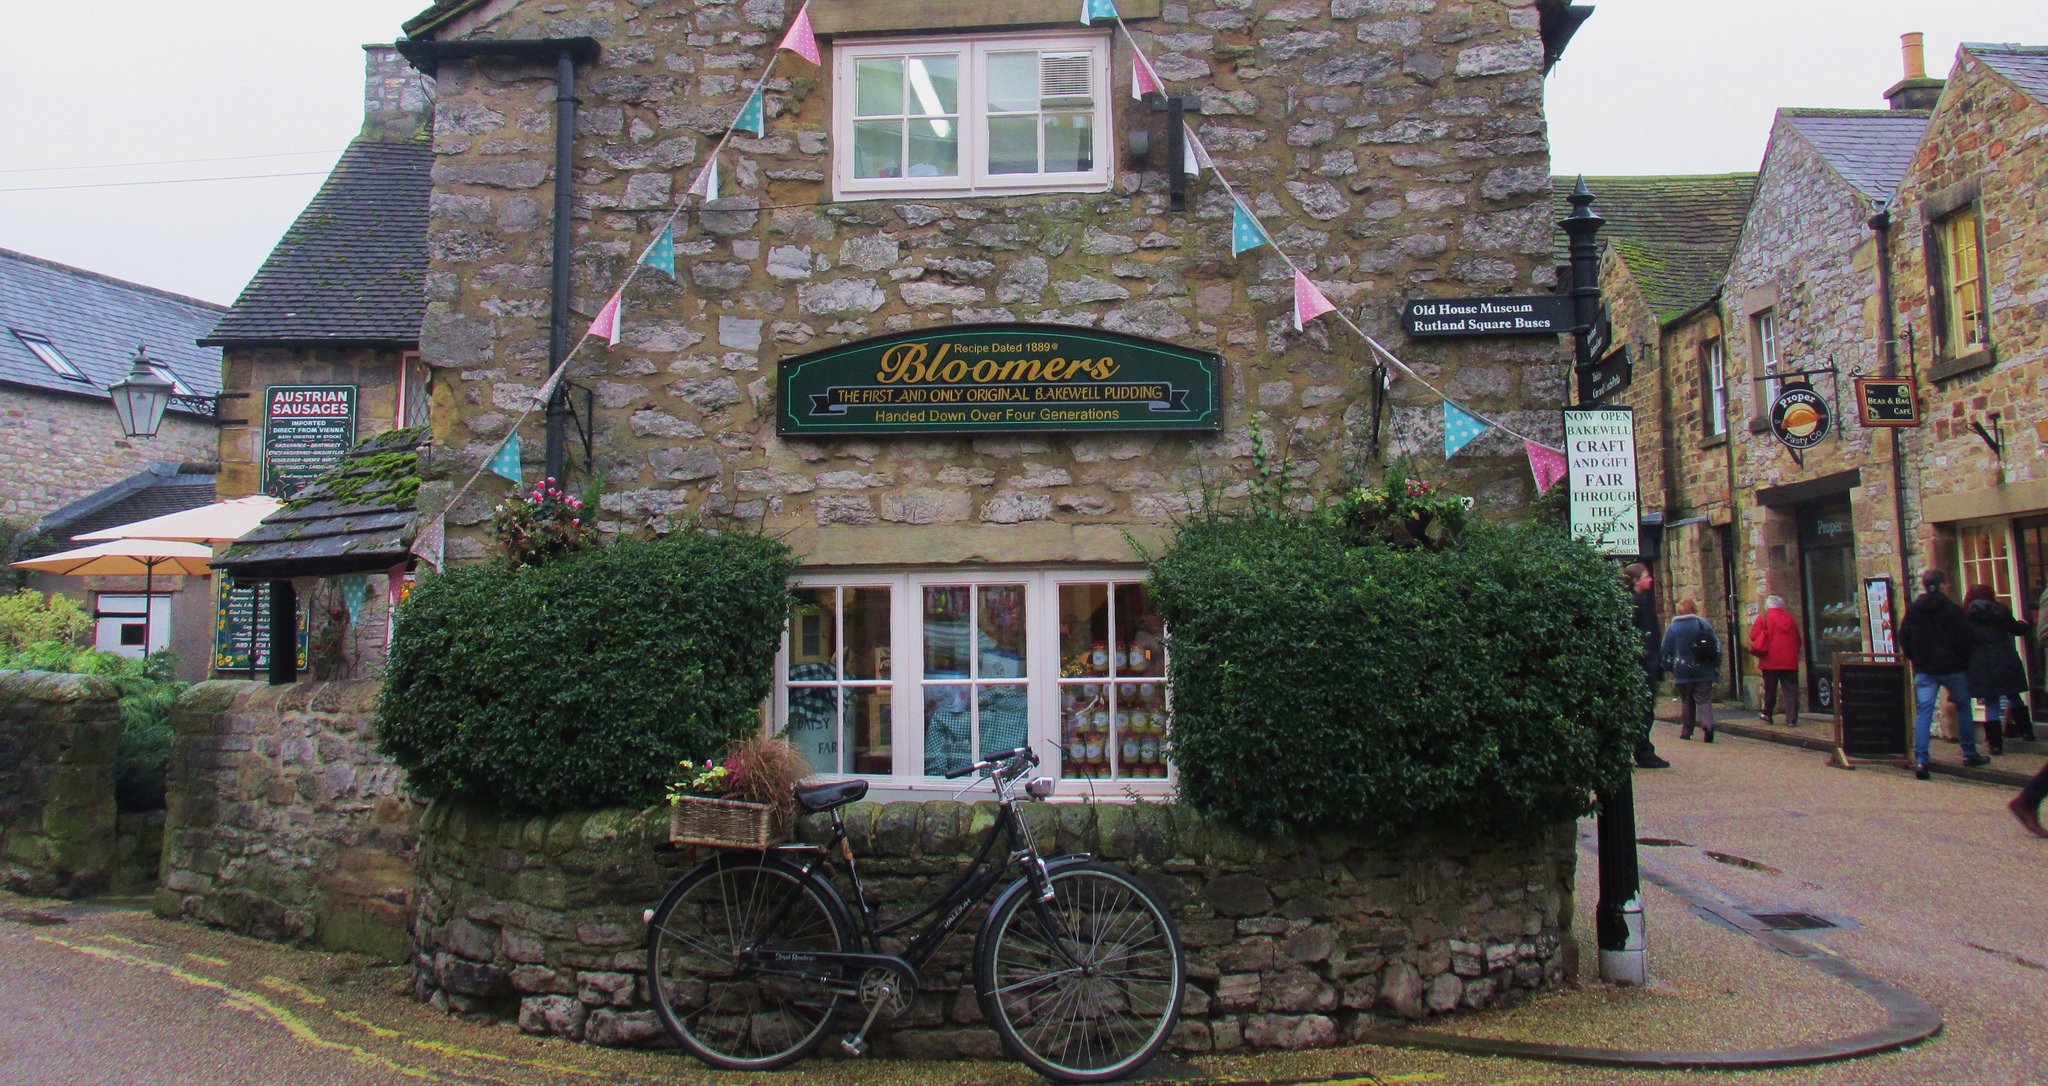 The pretty exterior of a Bakewell Pudding shop